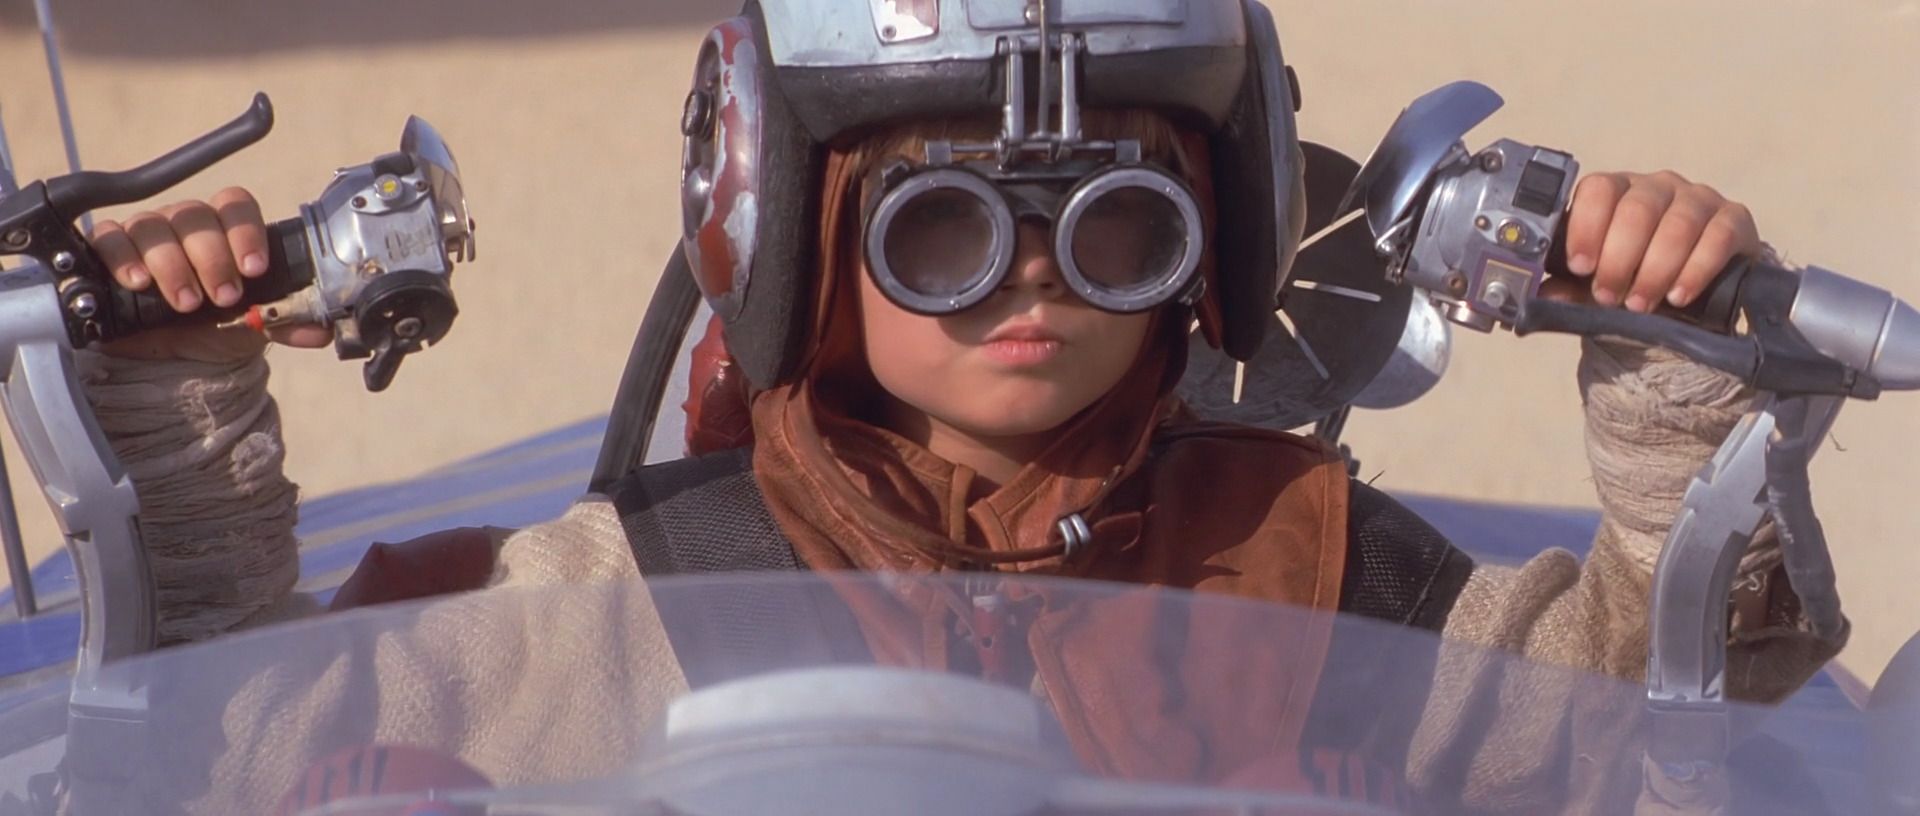 Anakin sitting in the cockpit of his podracer